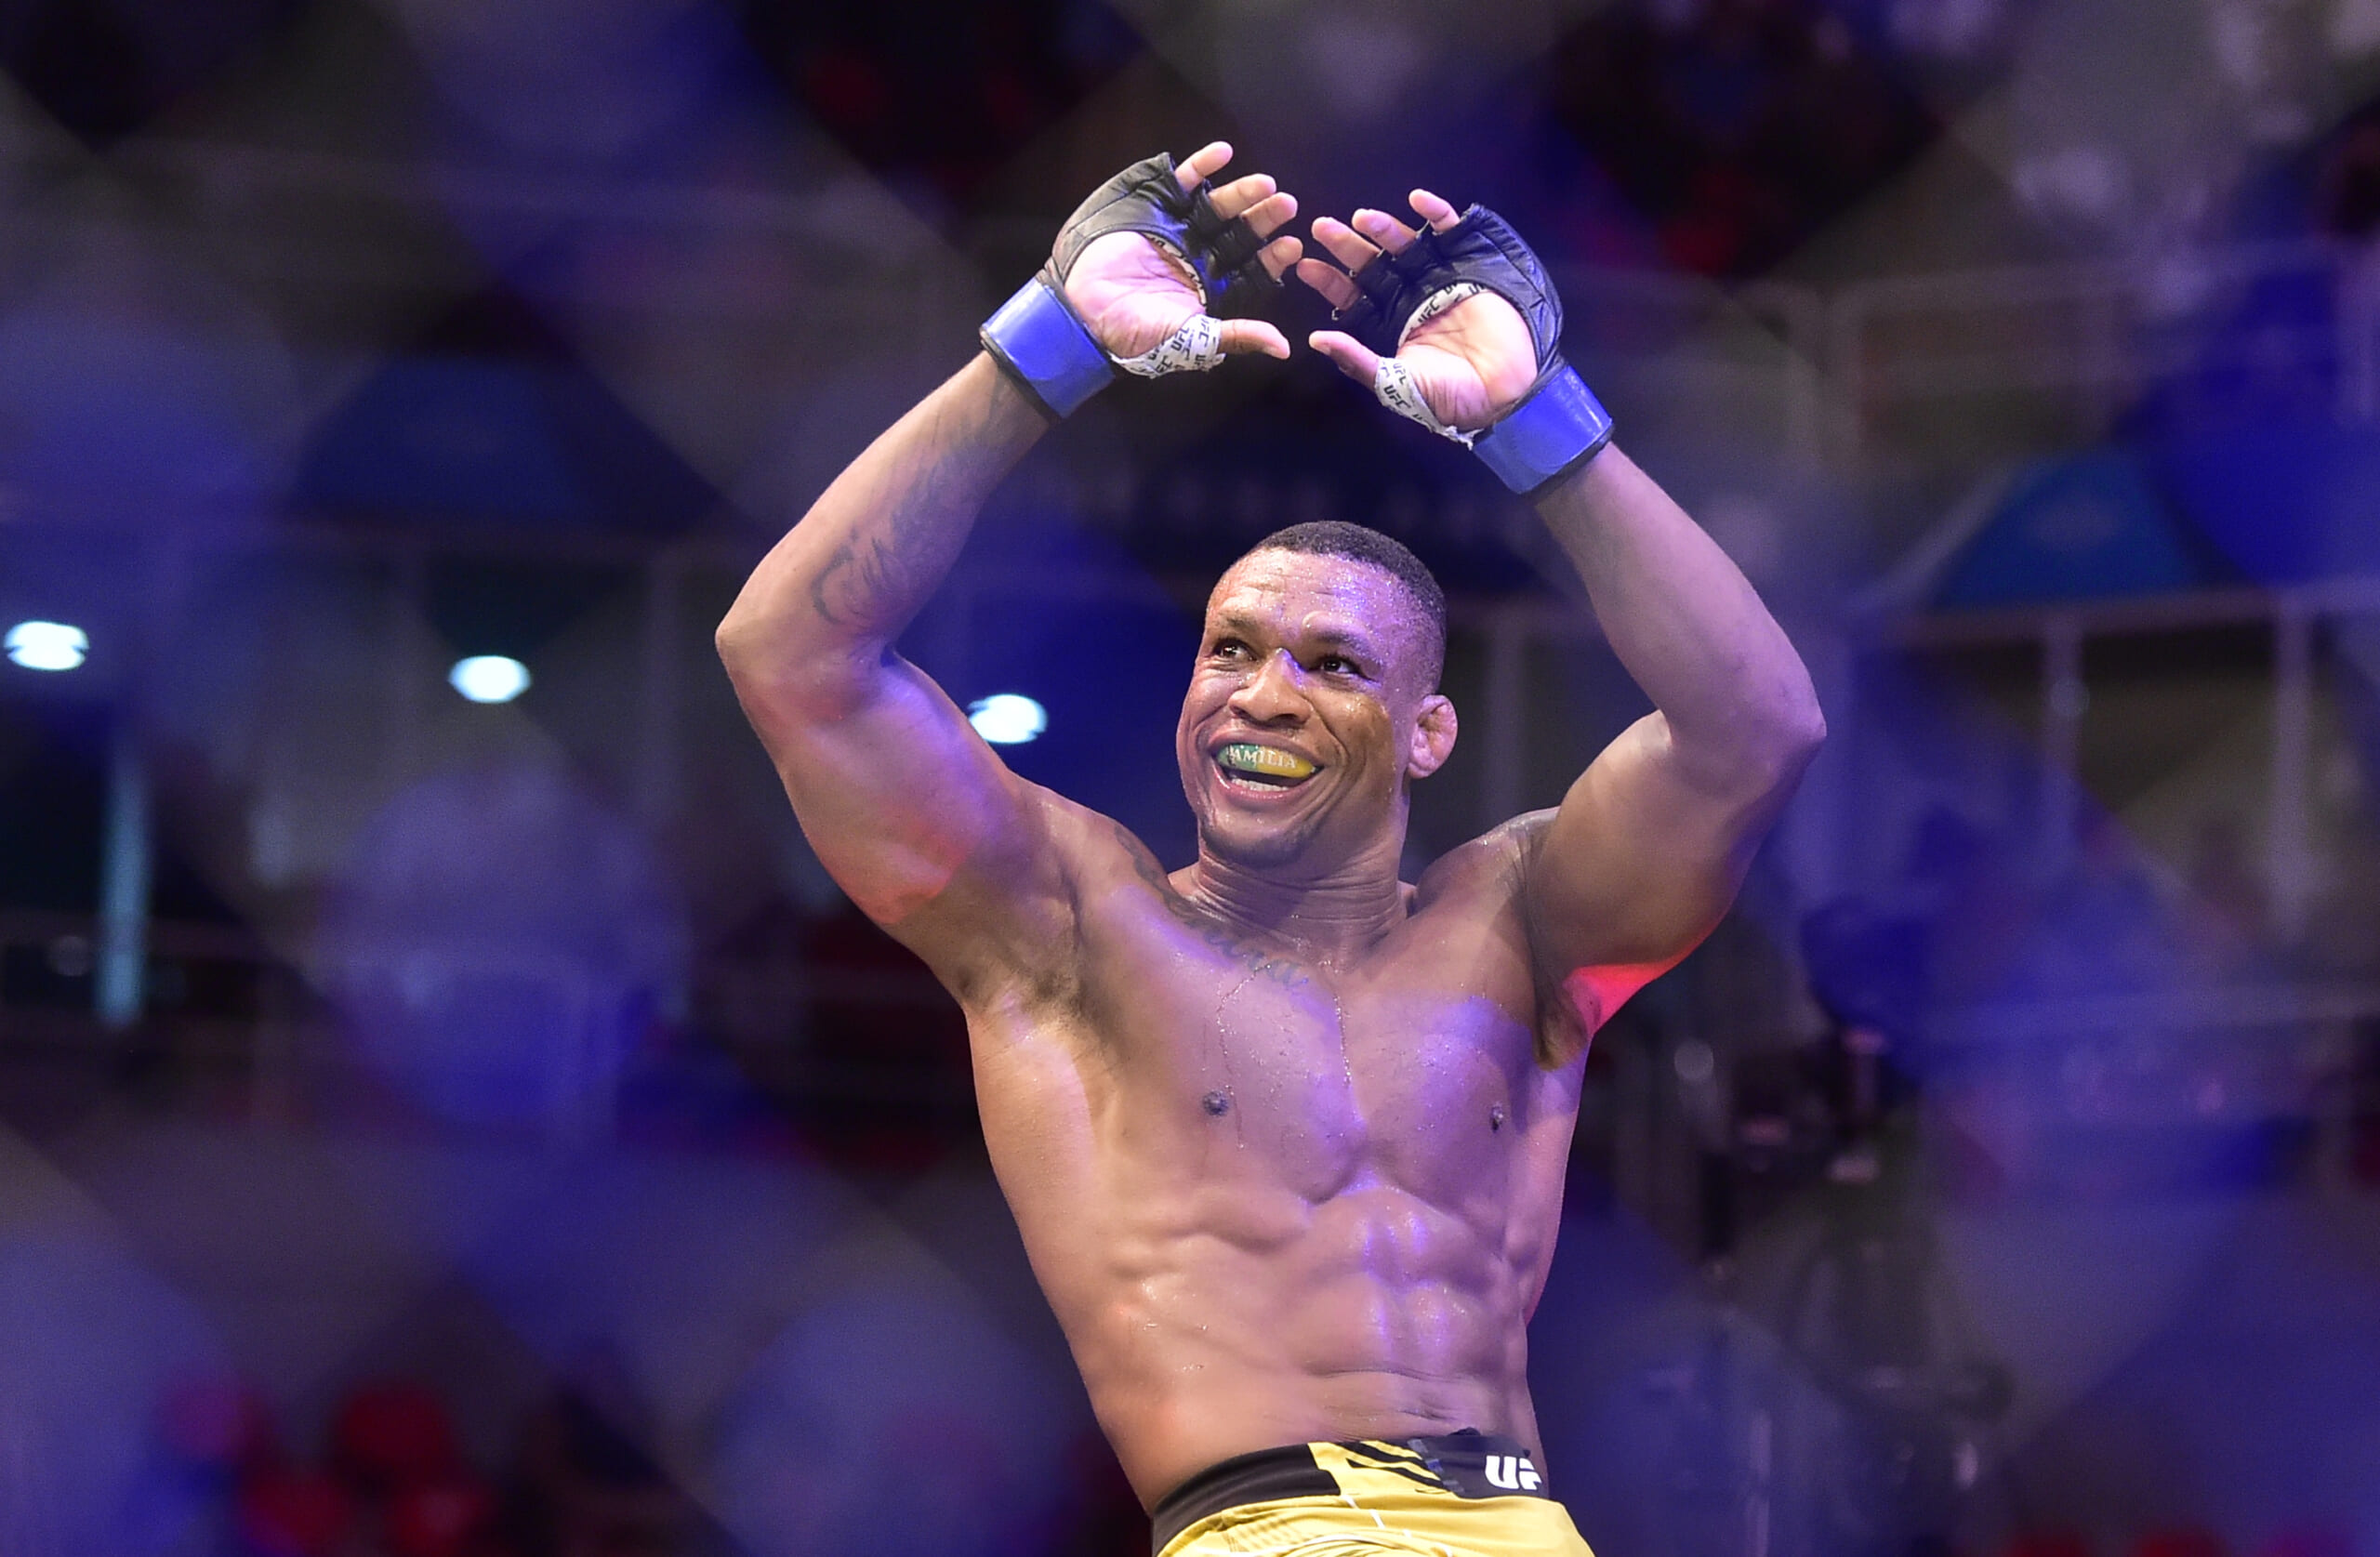 After his dominant win at UFC Sao Paulo, what’s next for Jailton Almeida?